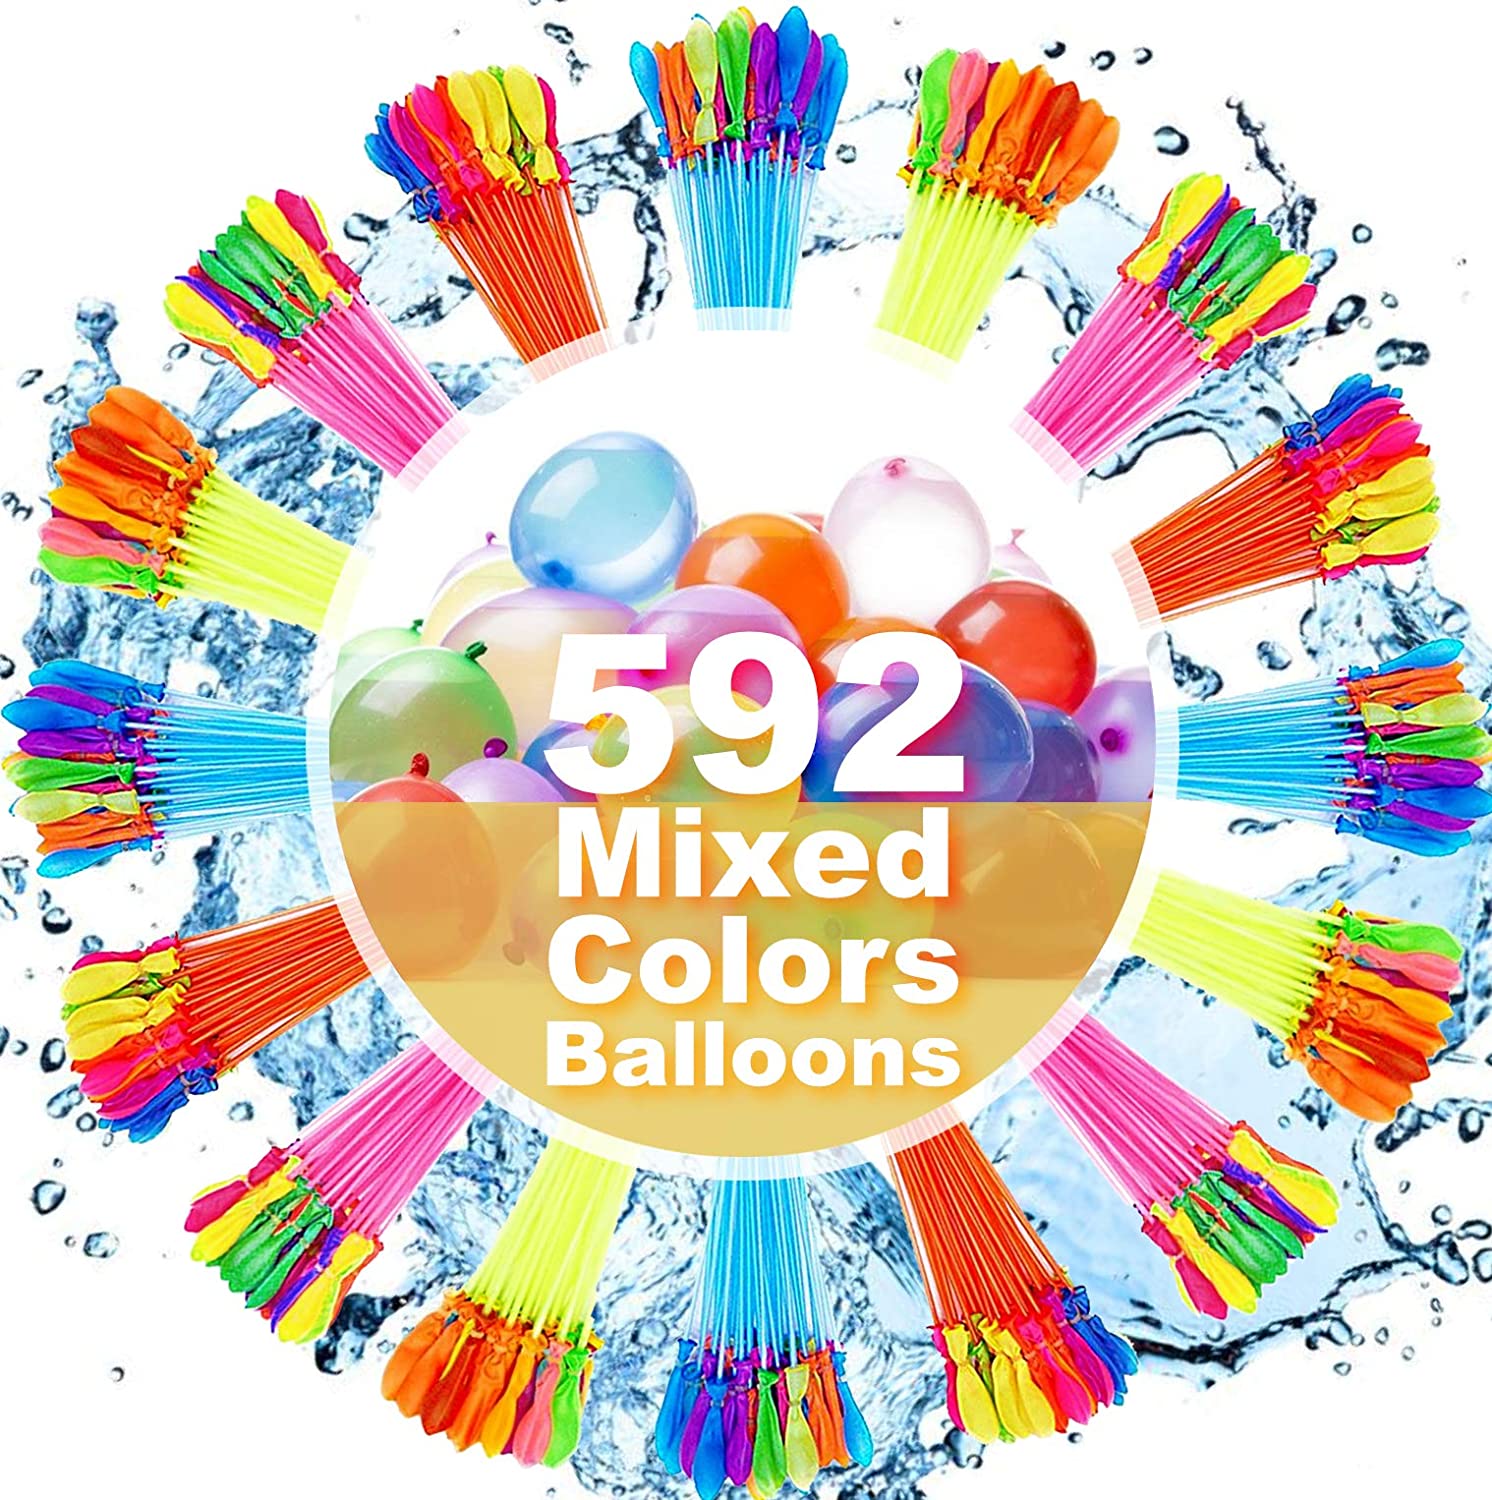 Water Balloons for Kids Girls Boys Balloons Set Party Games Quick Fill Balloons 592 Bunches Swimming Pool Outdoor Summer Fun HJ7